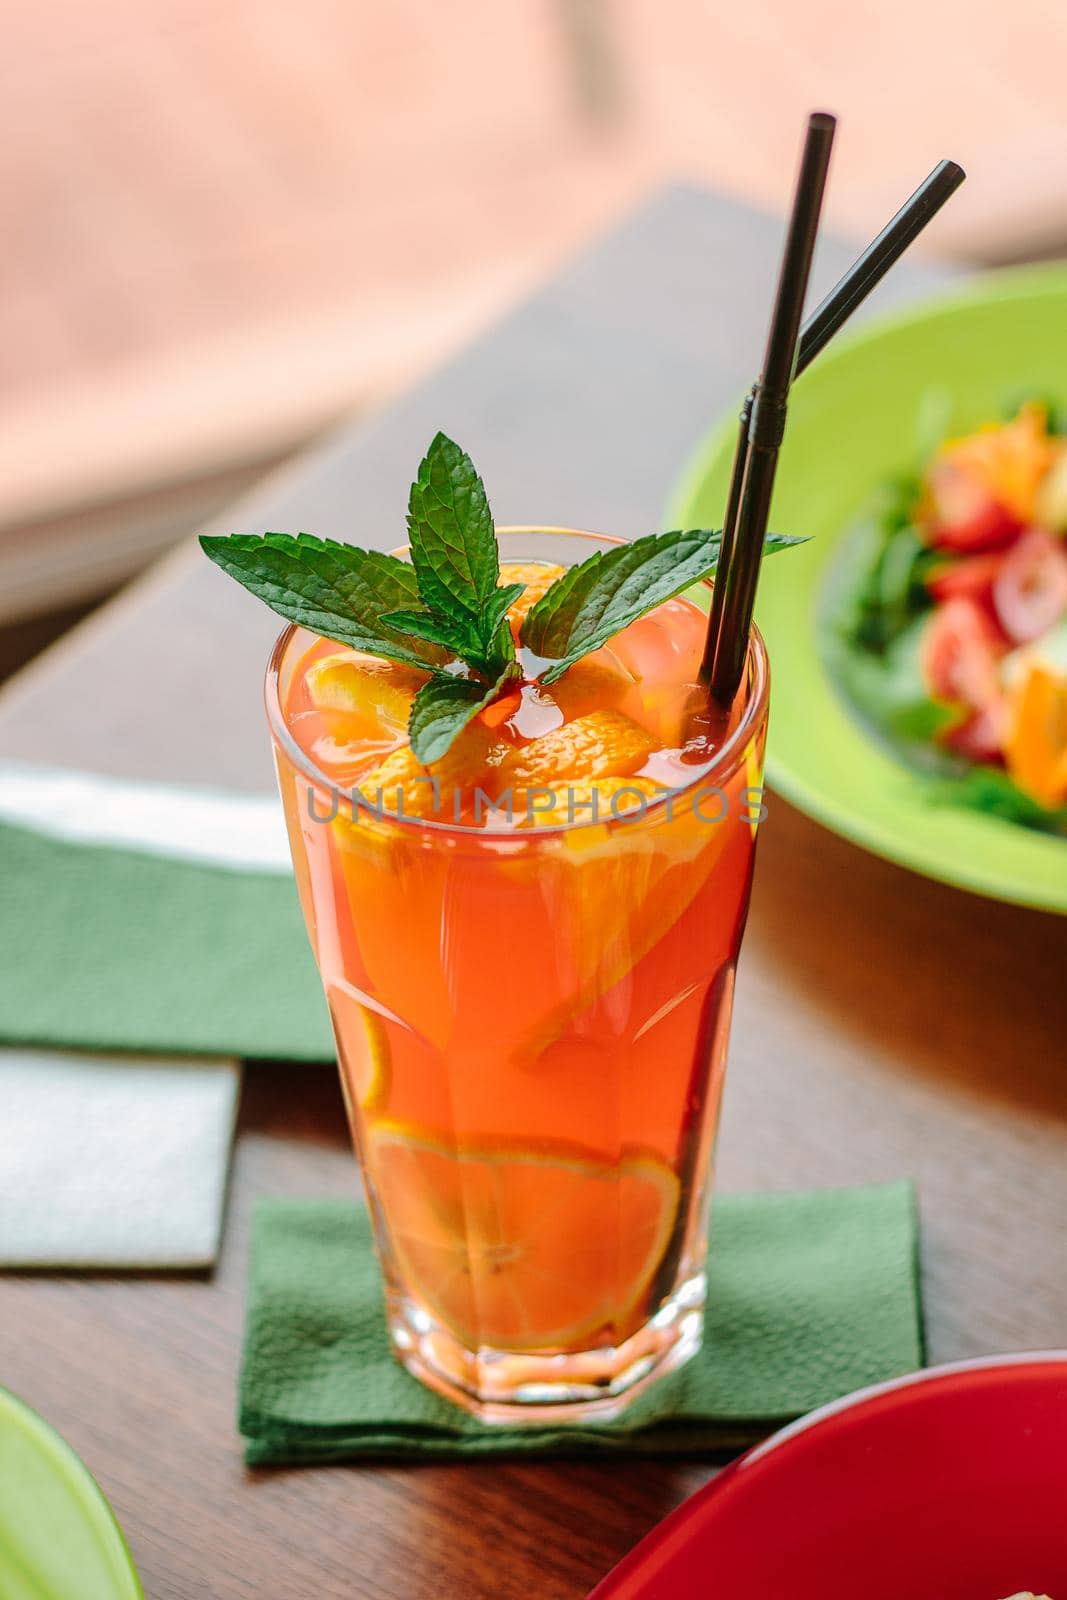 Fresh lemonade with citrus fruits and mint, great image for your needs.